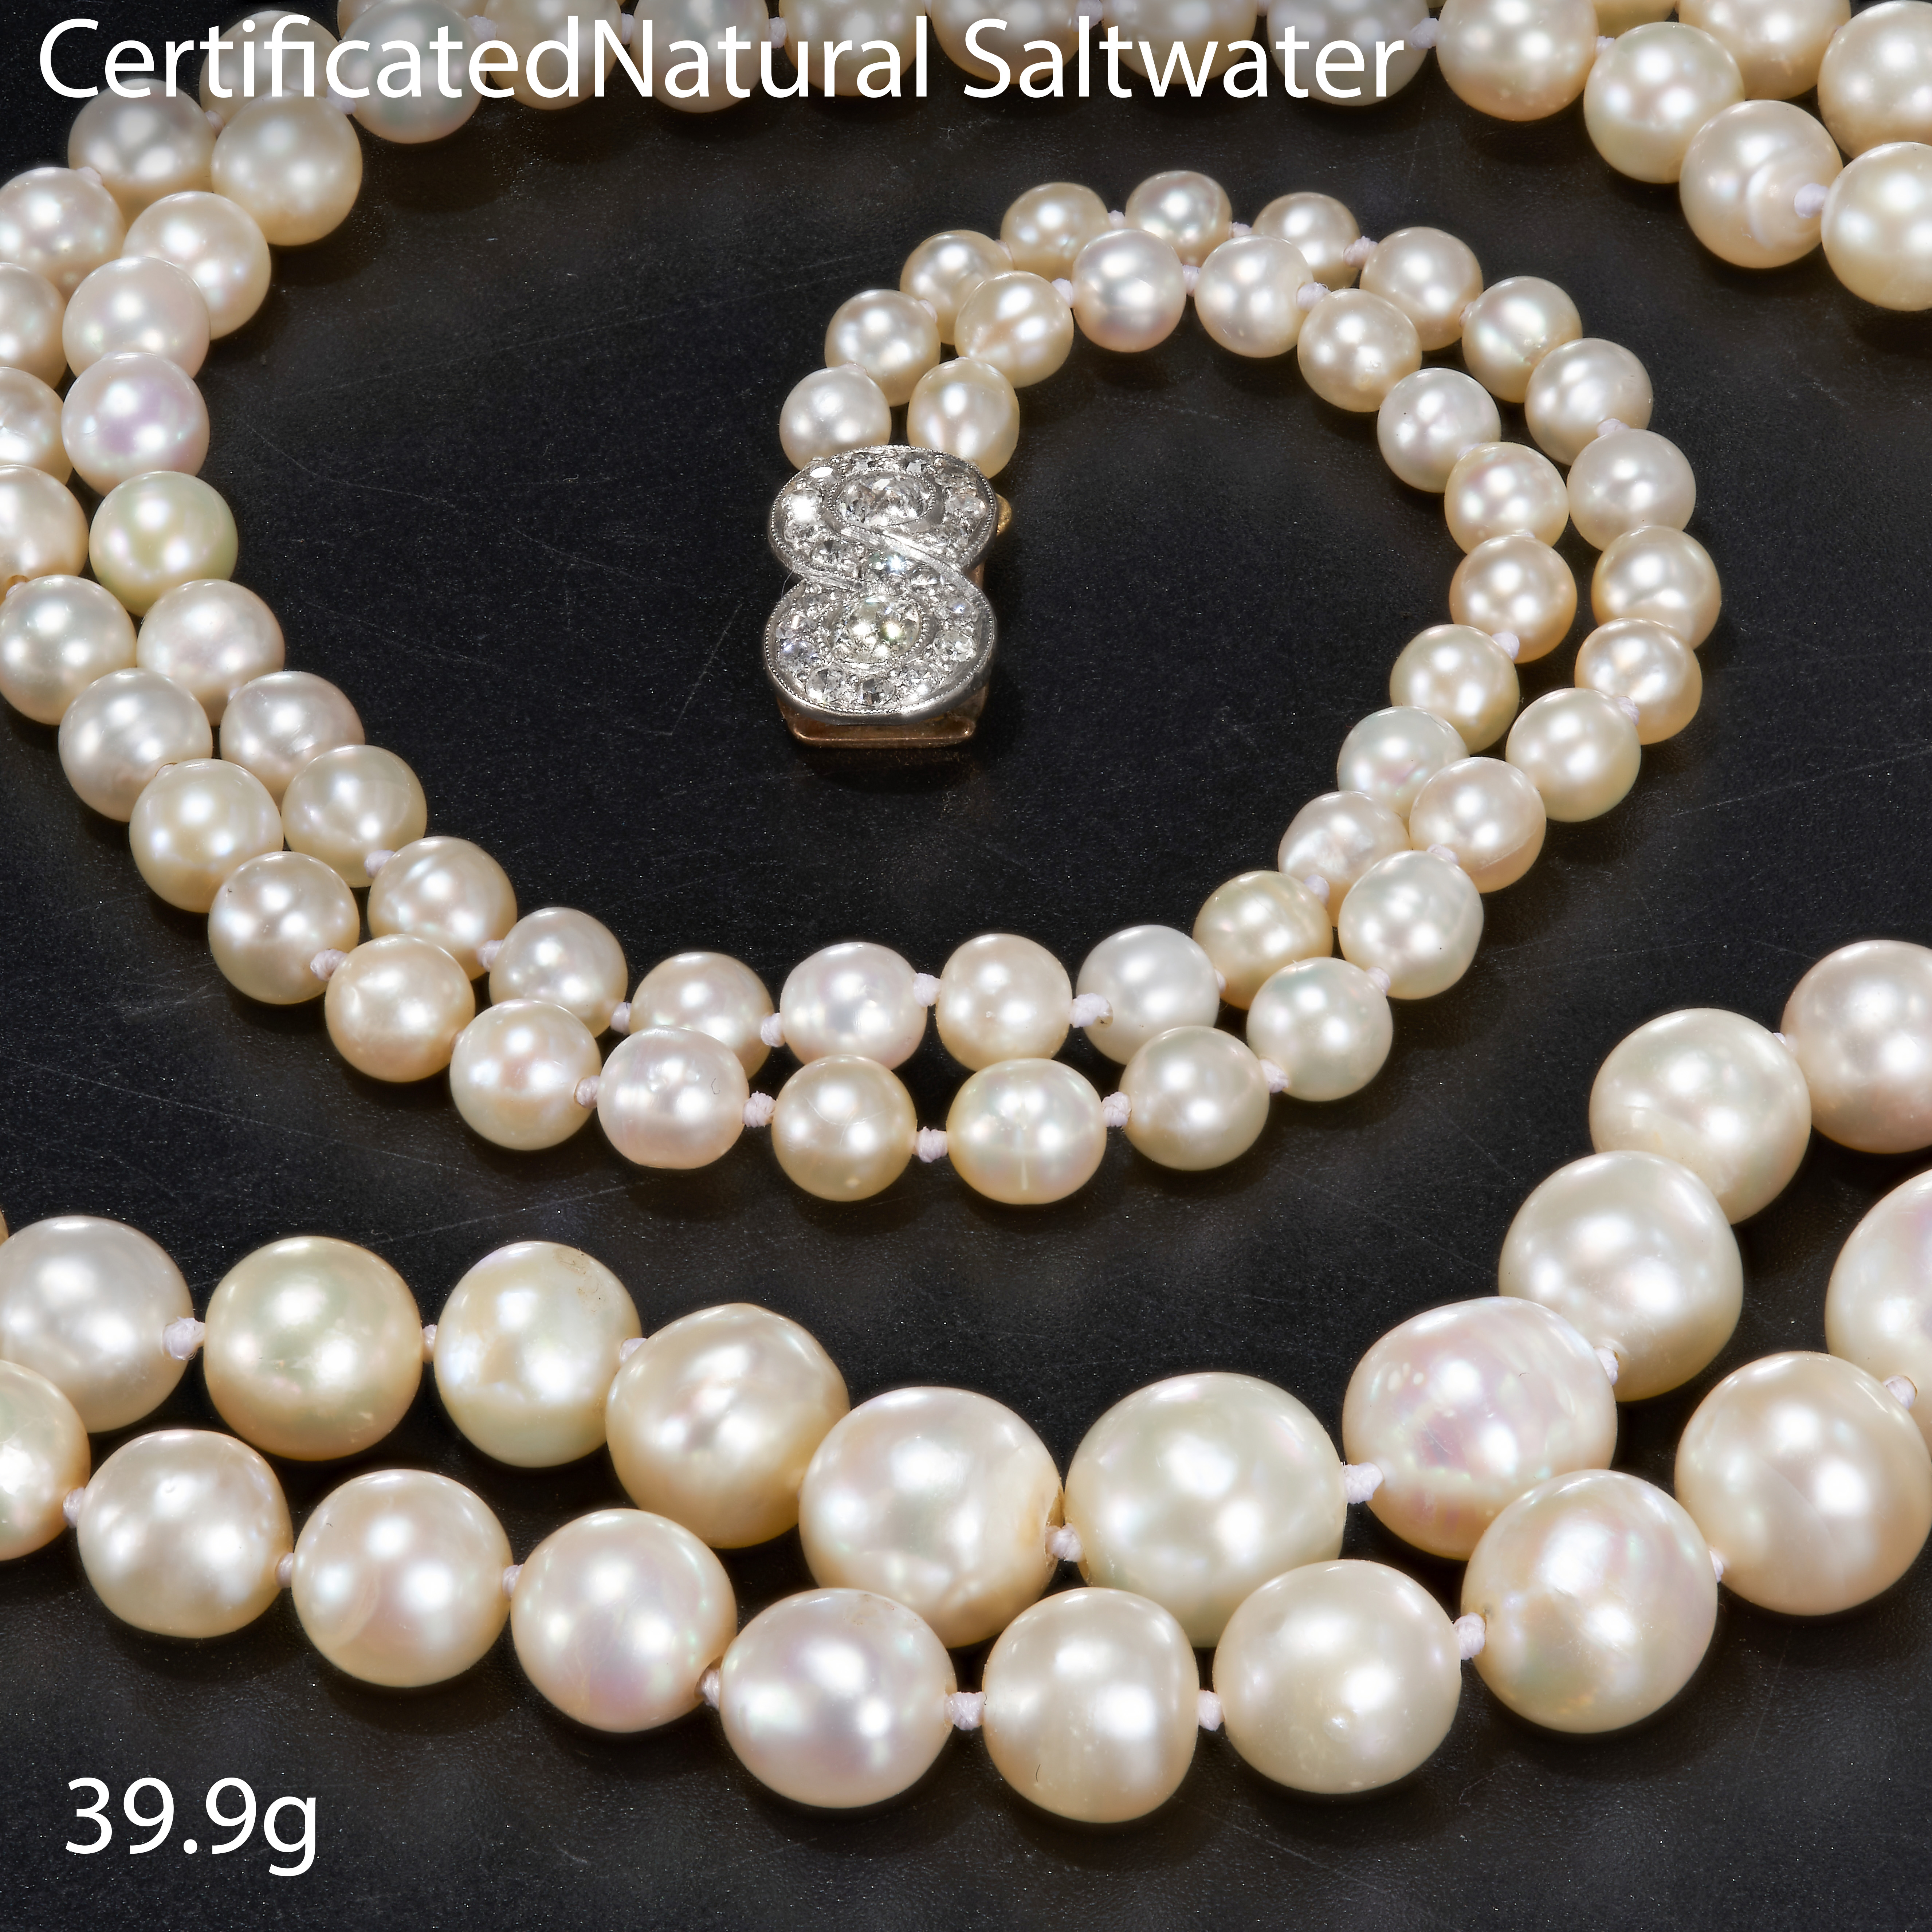 FINE CERTIFICATED NATURAL SALTWATER PEARL AND DIAMOND 2-ROW NECKLACE